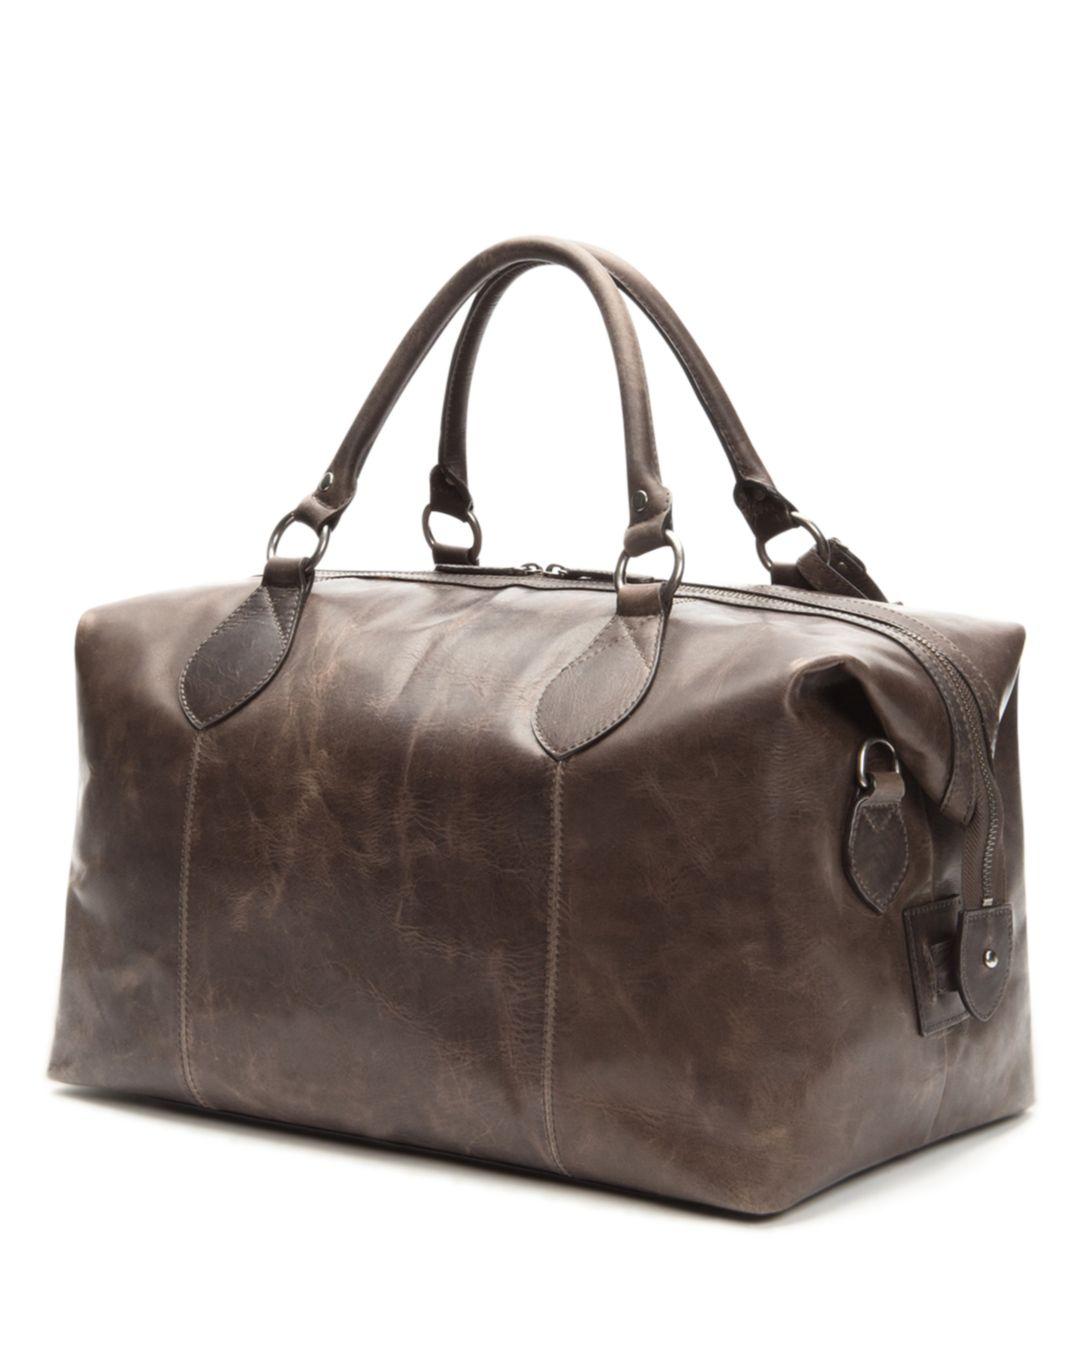 Frye Logan Overnight Leather Duffle Bag in Slate (Brown) for Men - Lyst